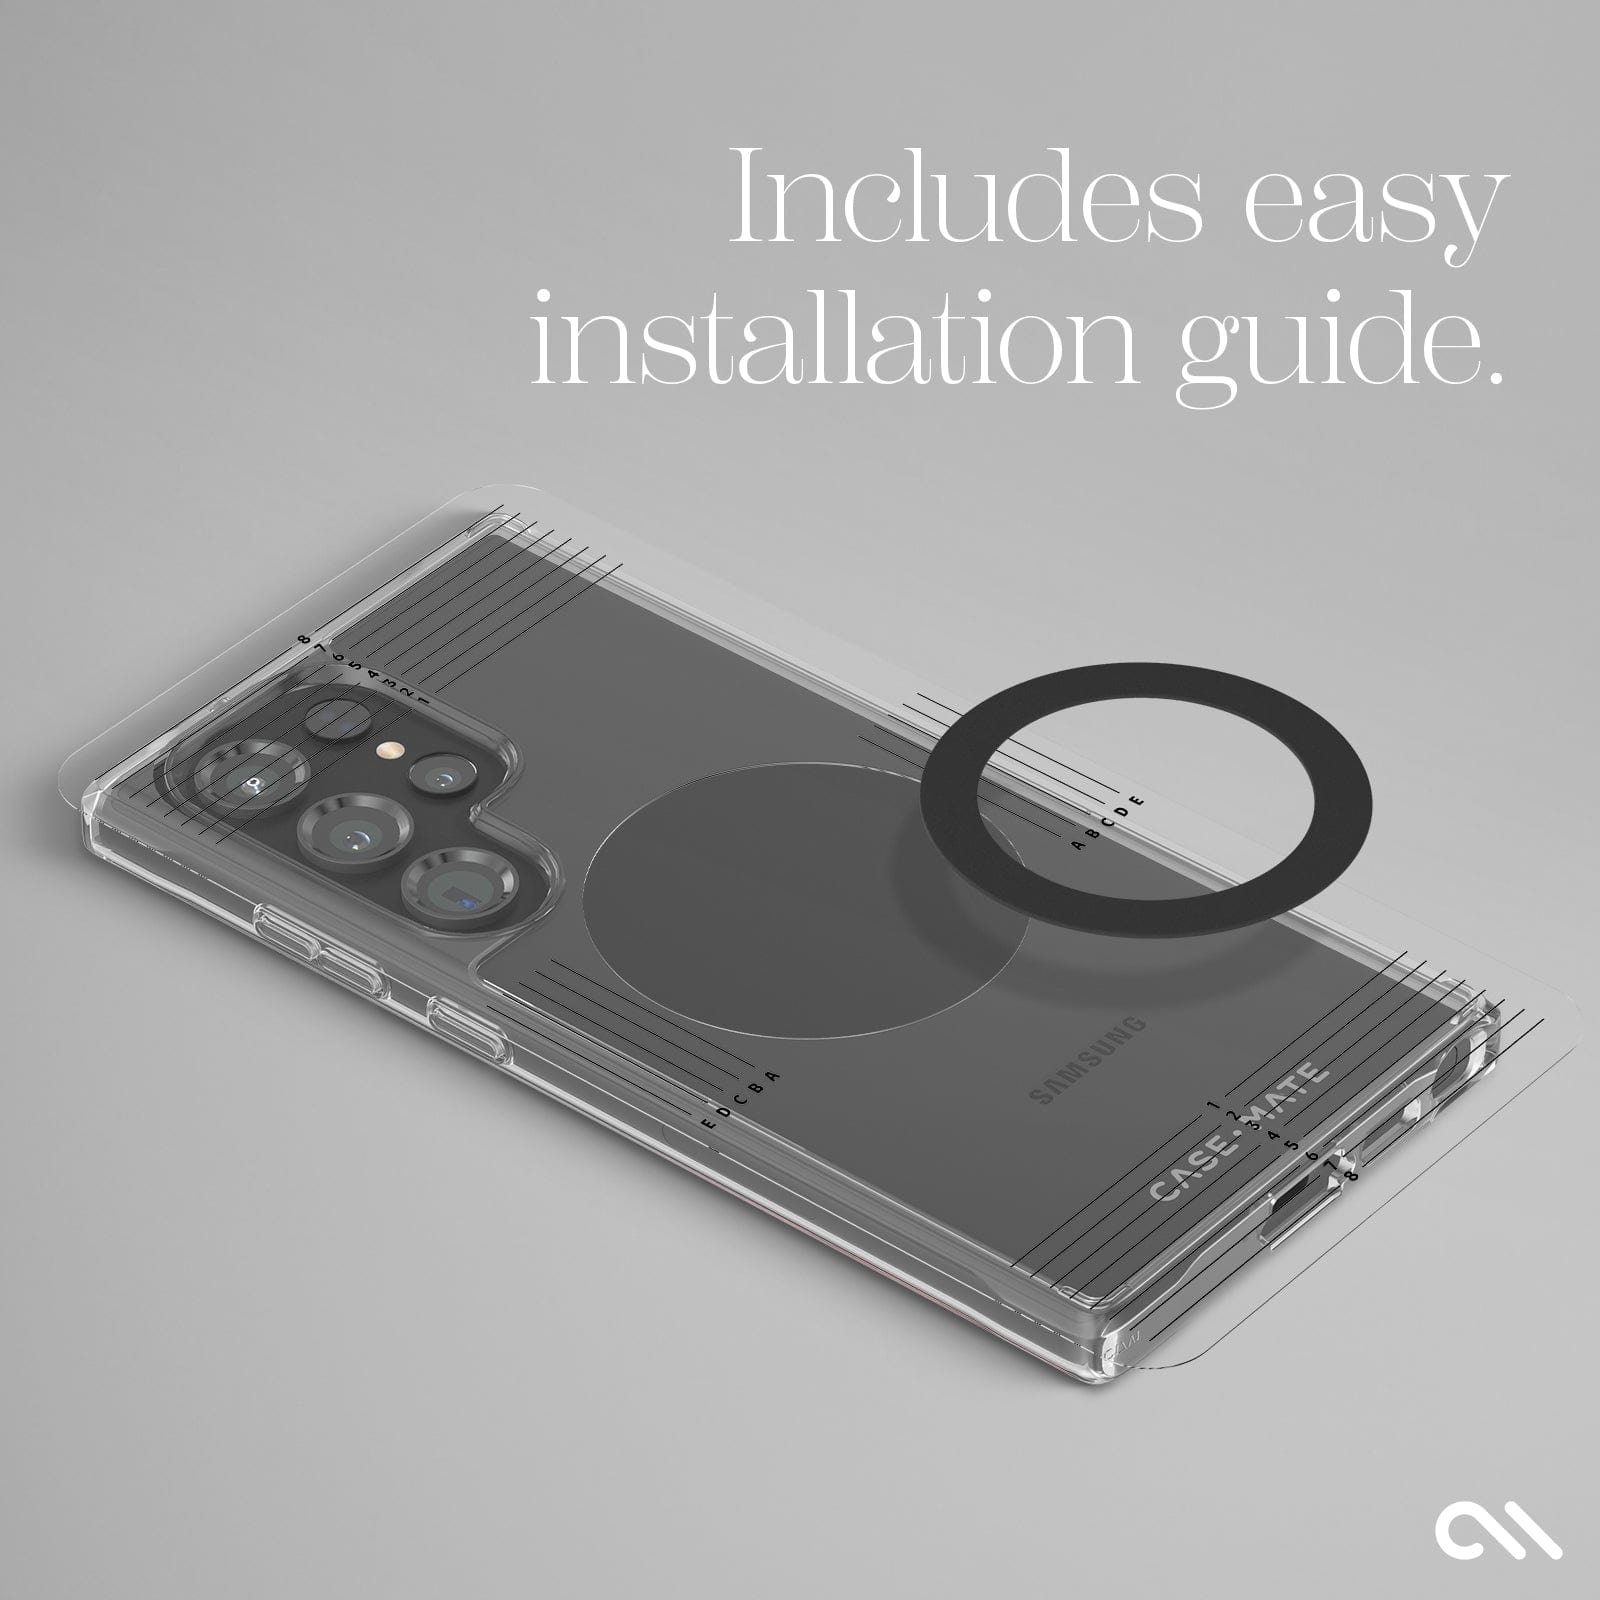 INCLUDES EASY INSTALLATION GUIDE